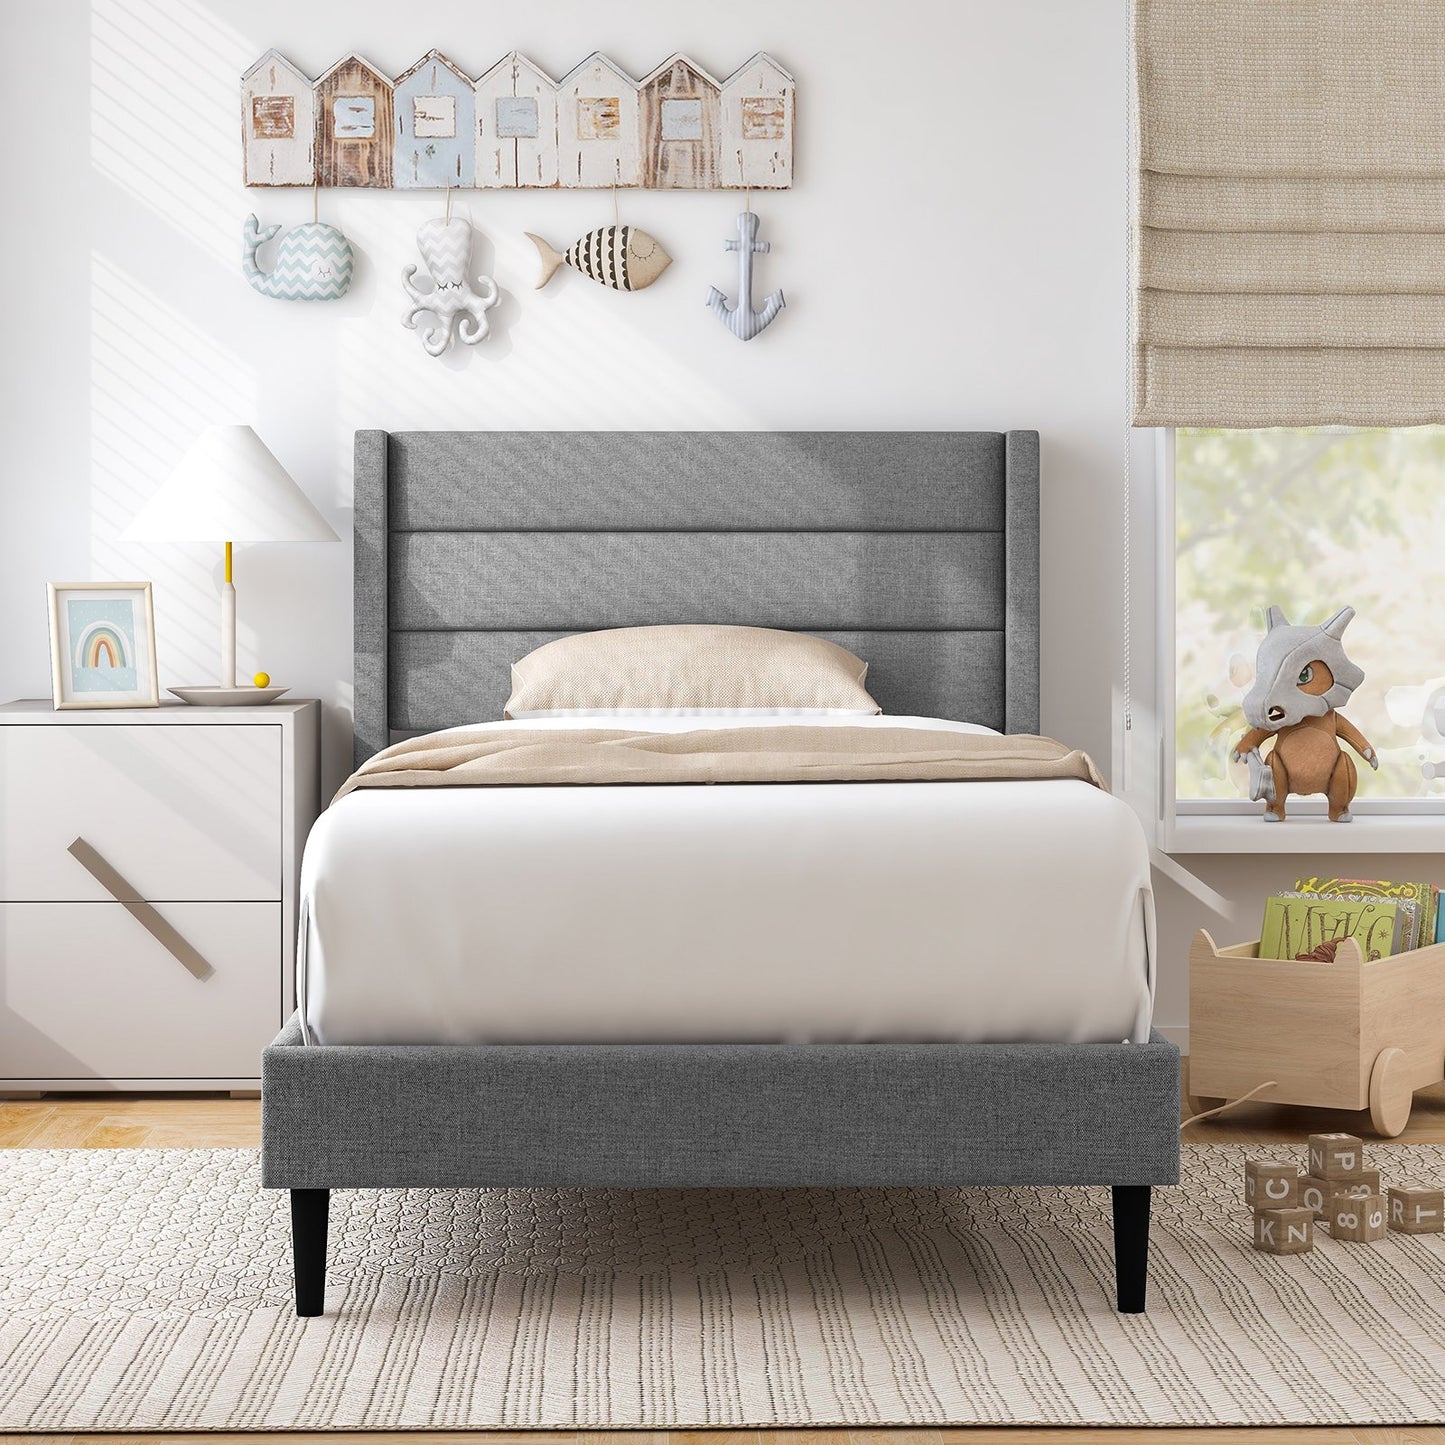 Linen Upholstered Platform Twin/Queen Bed Frame with Wingback Headboard-Twin Size, Gray